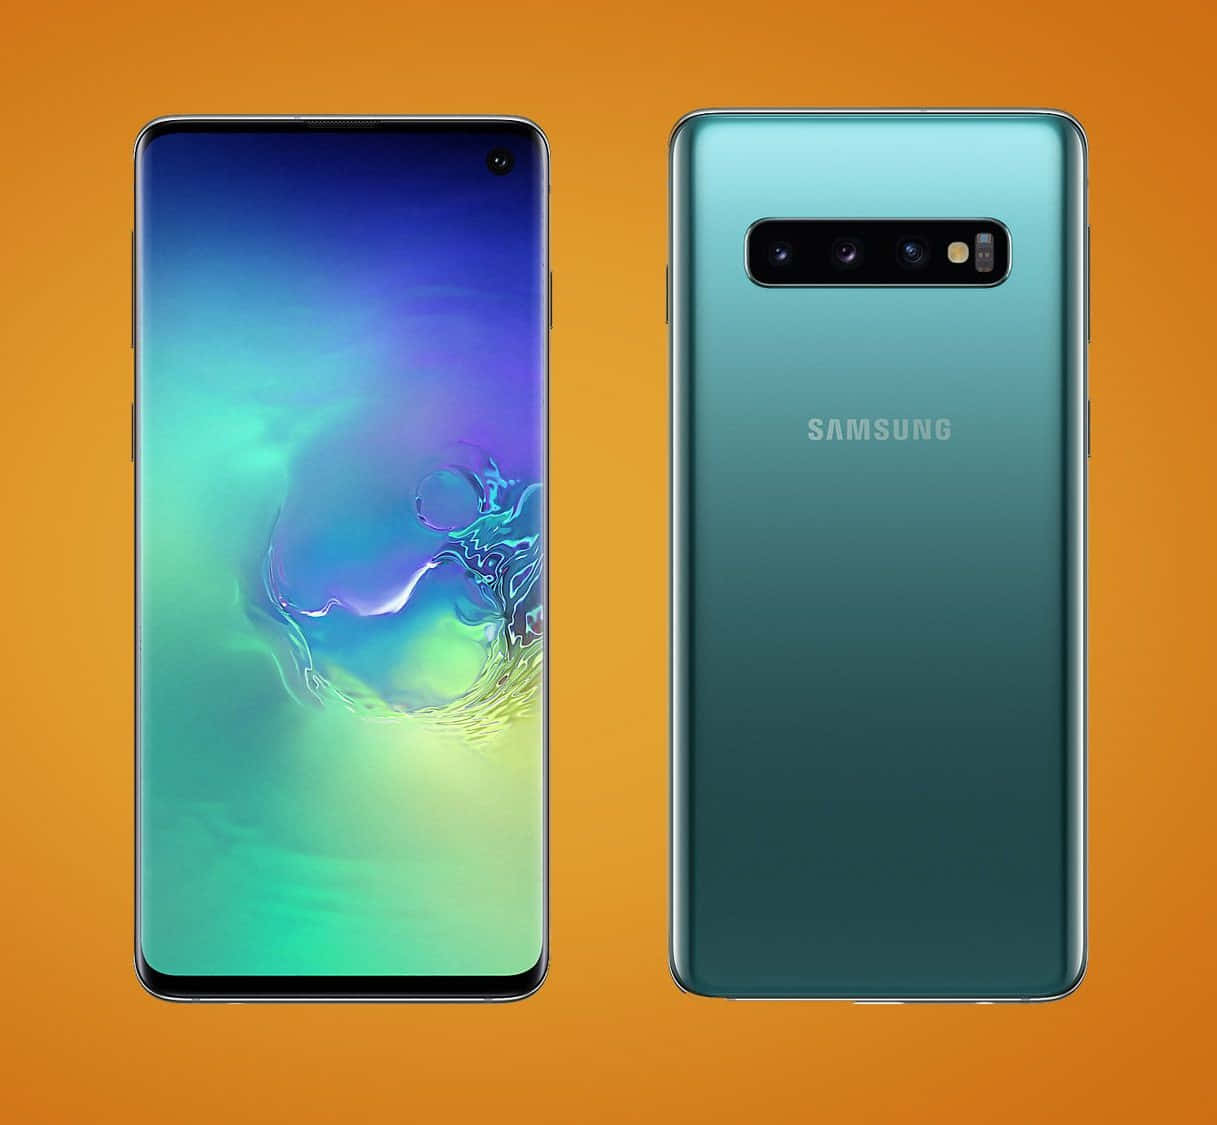 An Up-Close Look at the Galaxy S10